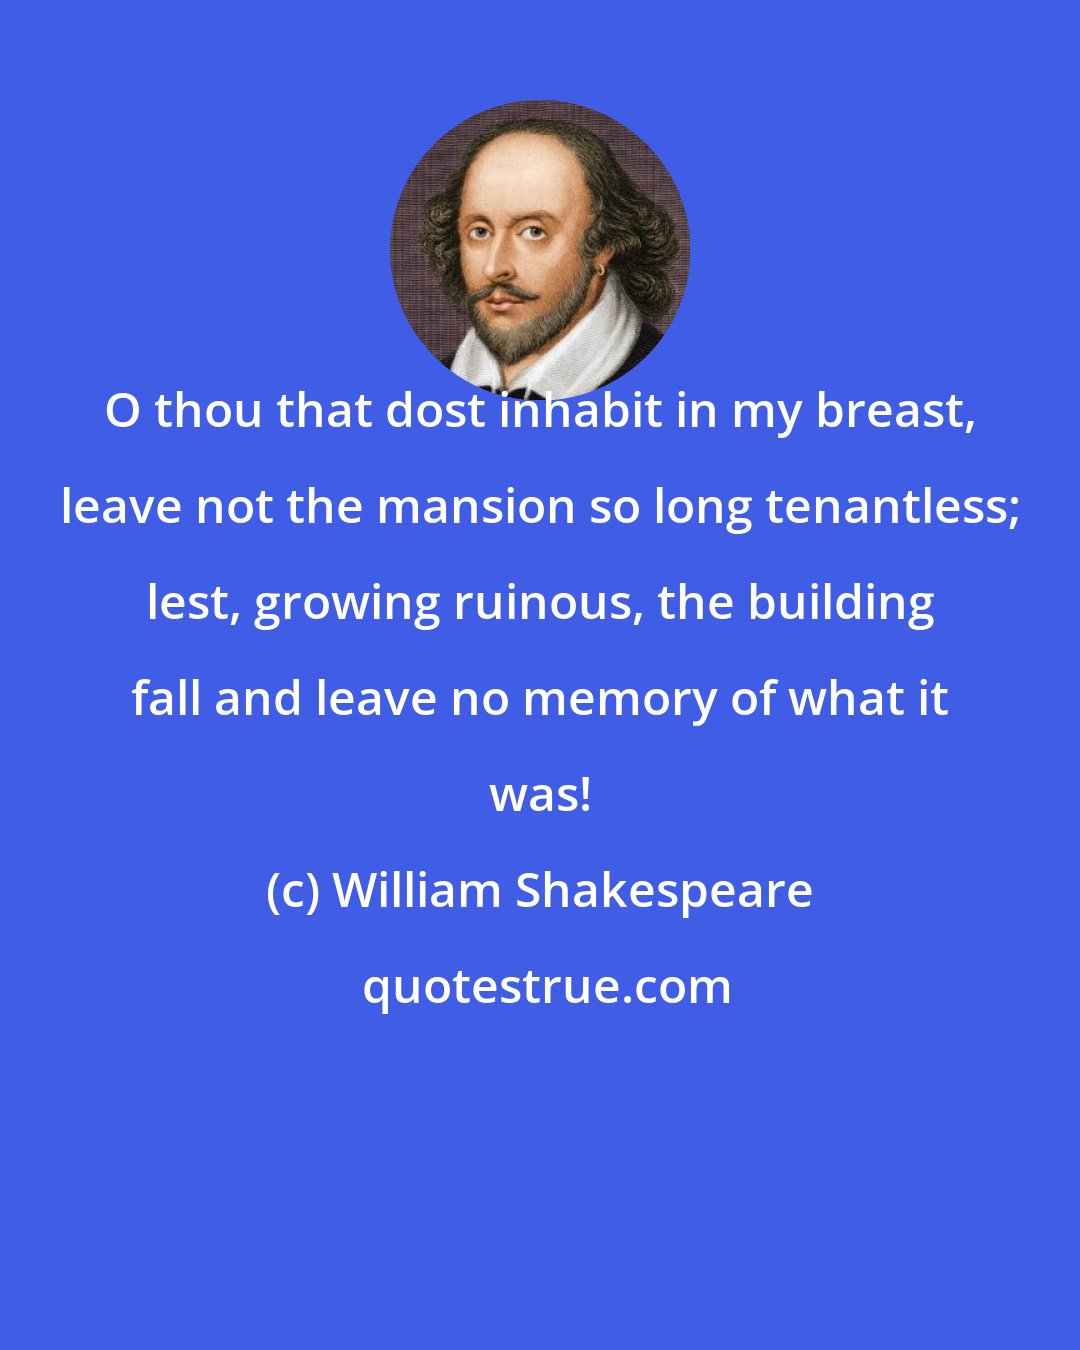 William Shakespeare: O thou that dost inhabit in my breast, leave not the mansion so long tenantless; lest, growing ruinous, the building fall and leave no memory of what it was!